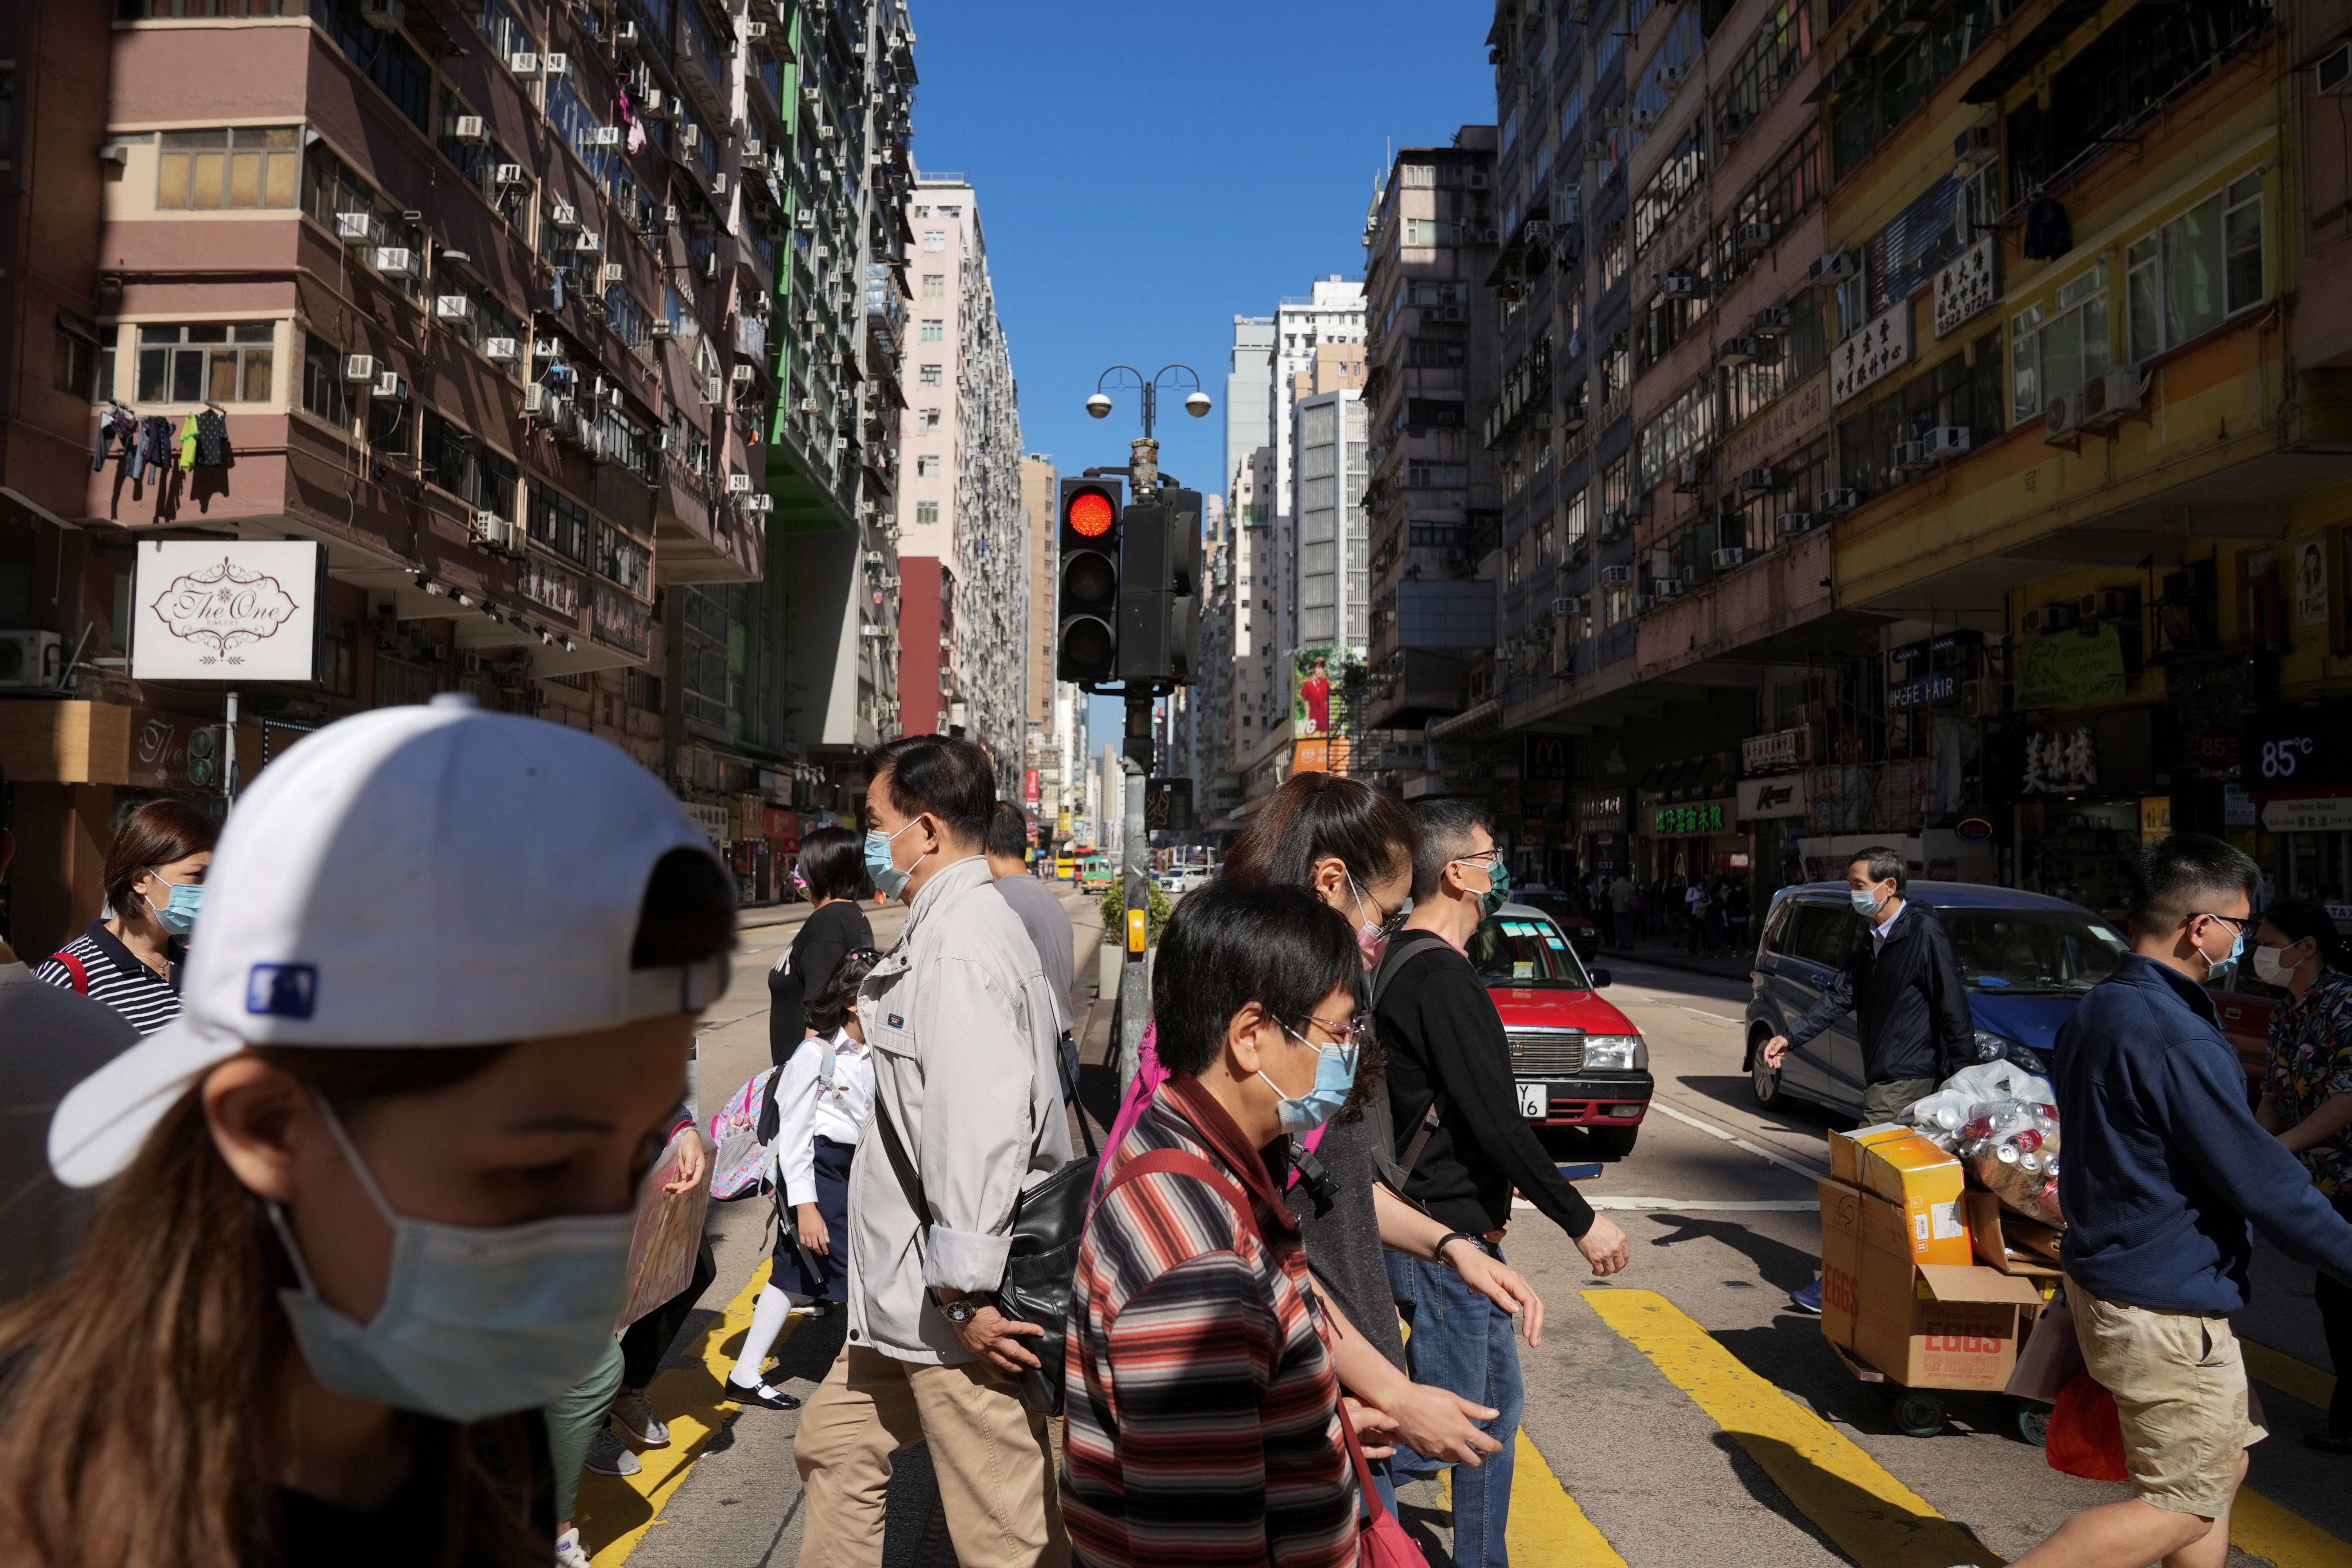 People wearing face masks to prevent the spread of the coronavirus disease (COVID-19), walk on a street in Hong Kong